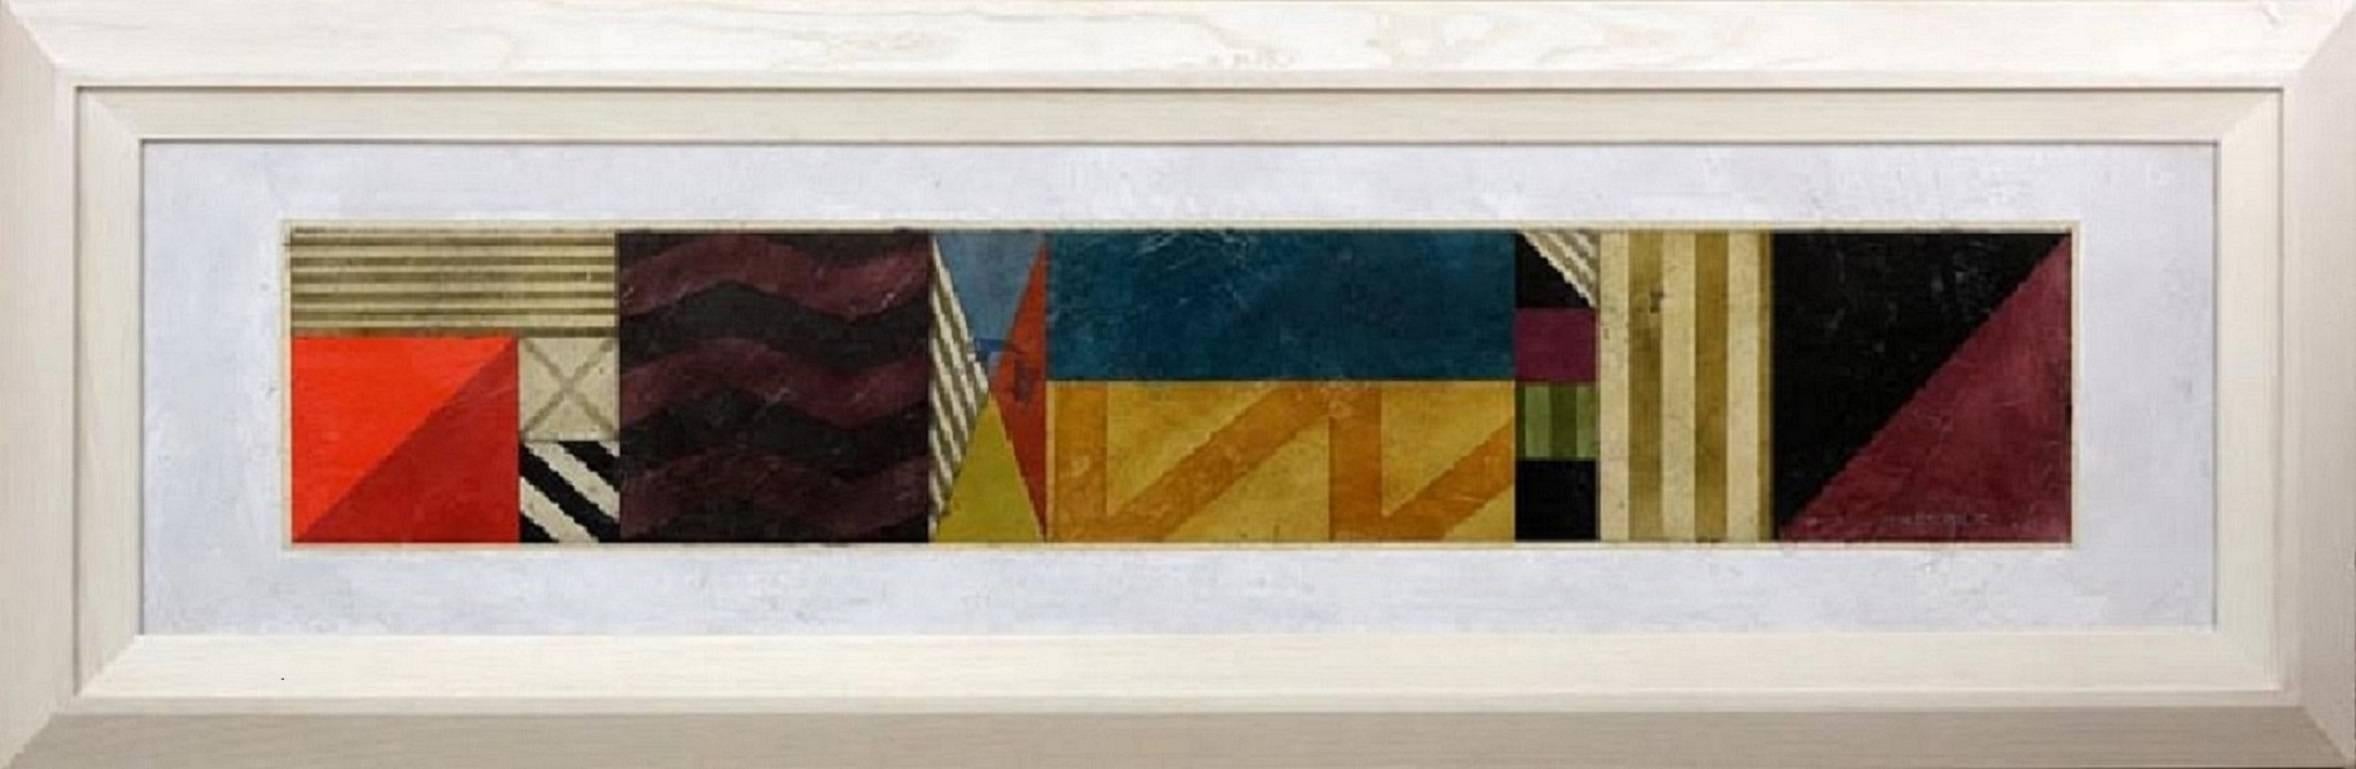 Gregg Robinson, American (born 1948) "Cipher Bar 19" Oil on Canvasboard Panel. Artist signed, title and dated 1990 far right. Very minor rubbing to paint. Panel measures 15-1/4" H x 63-1/2" W, frame measures 24-1/4" H x 72-1/4" W

GREGG ROBINSON
The